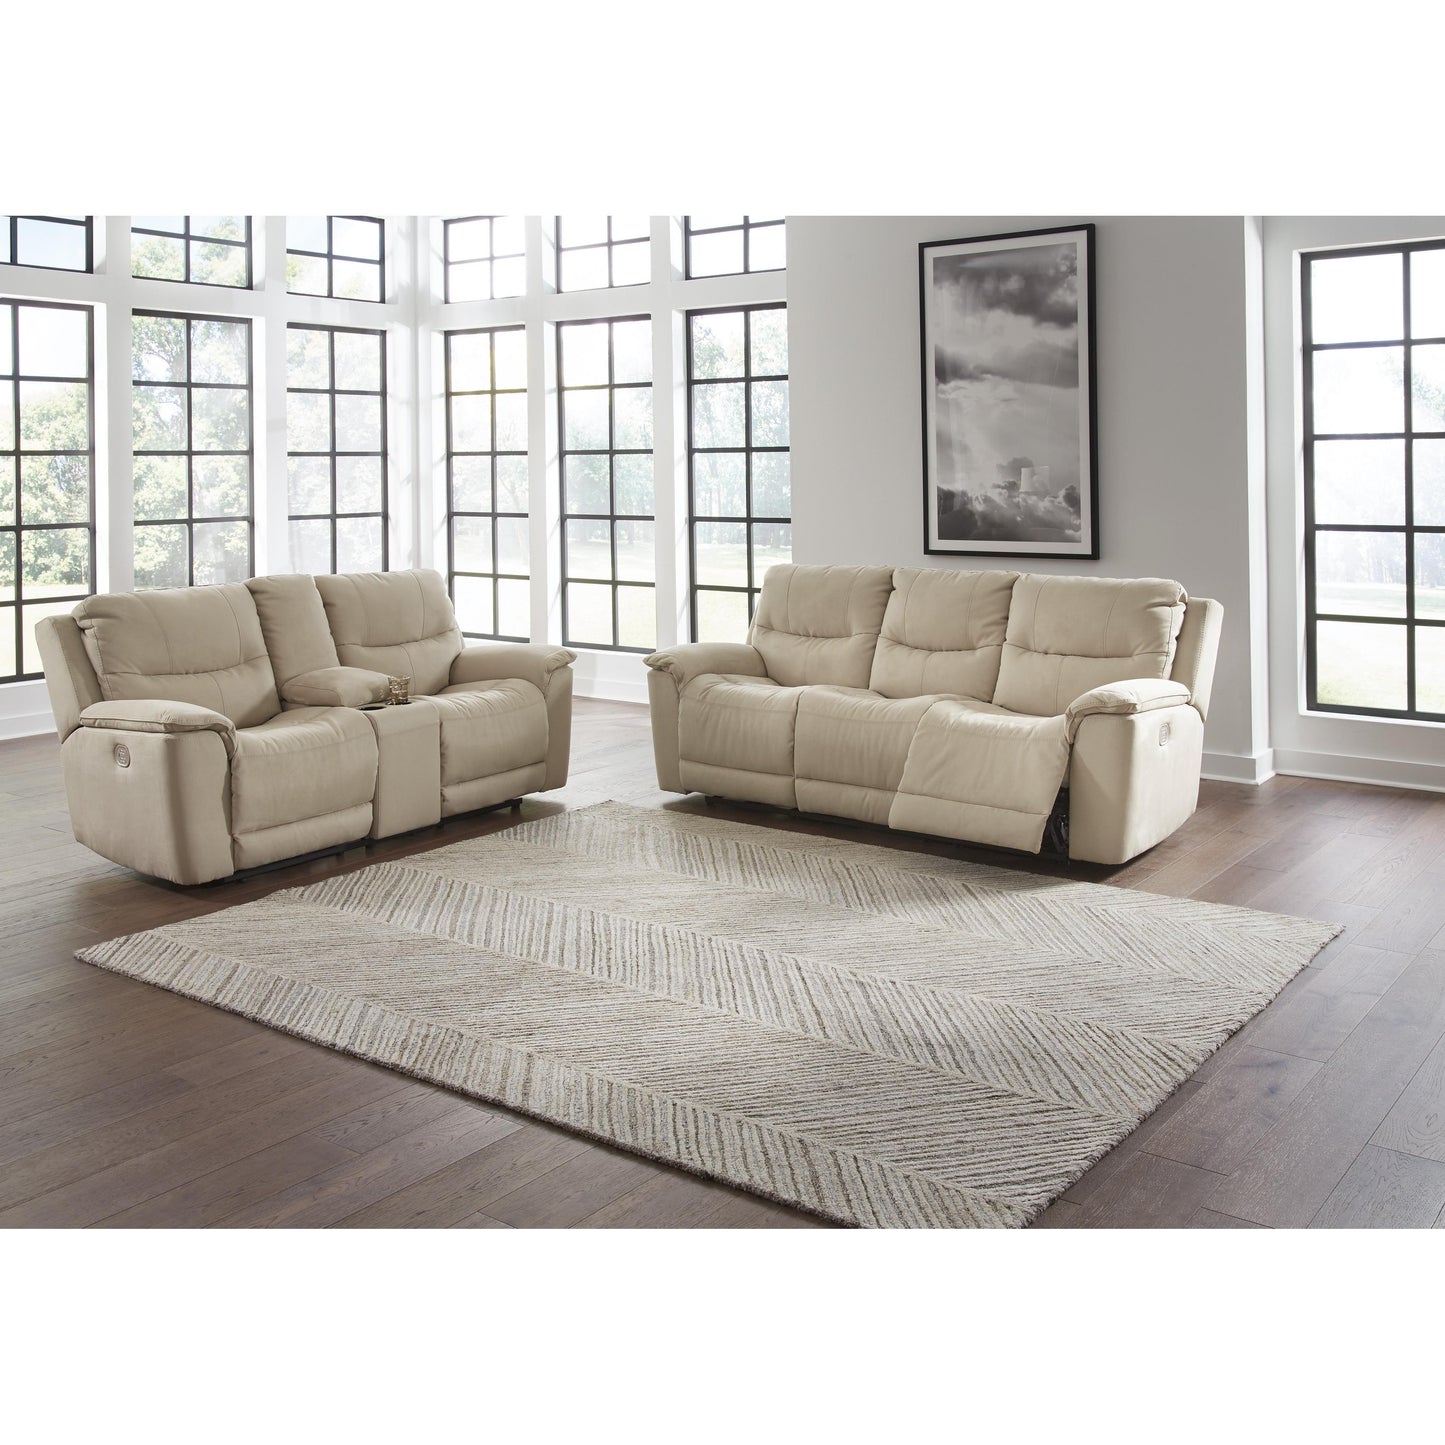 Signature Design by Ashley Next-Gen Gaucho Power Reclining Leather Look Sofa 6080715 IMAGE 6